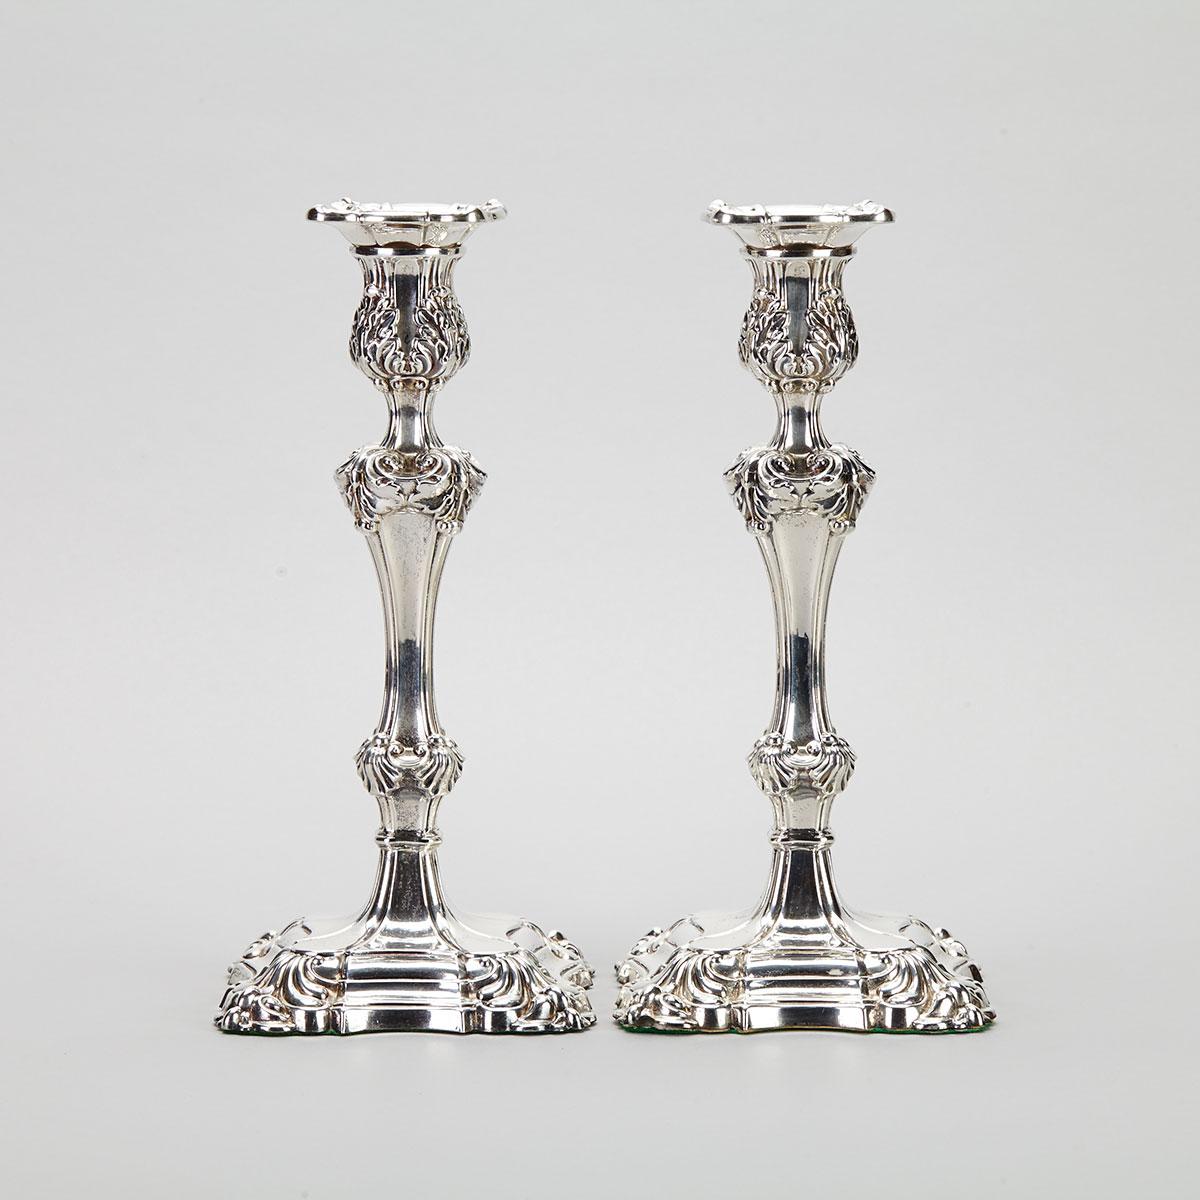 Pair of English Silver Table Candlesticks, London, 1973